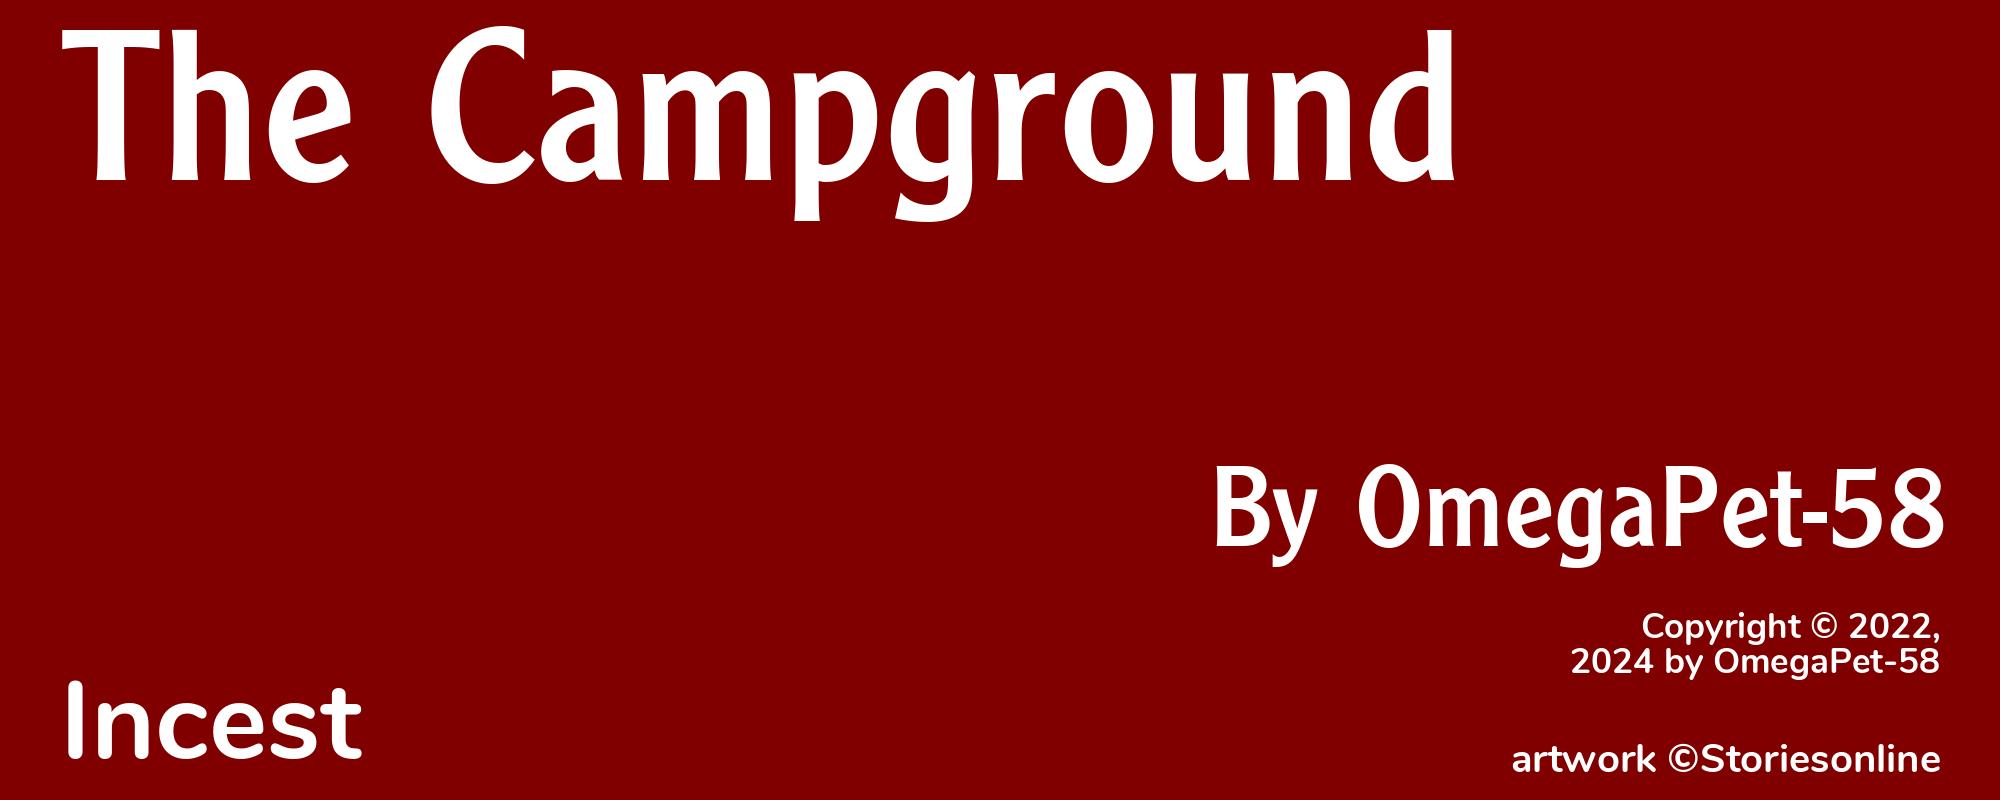 The Campground - Cover